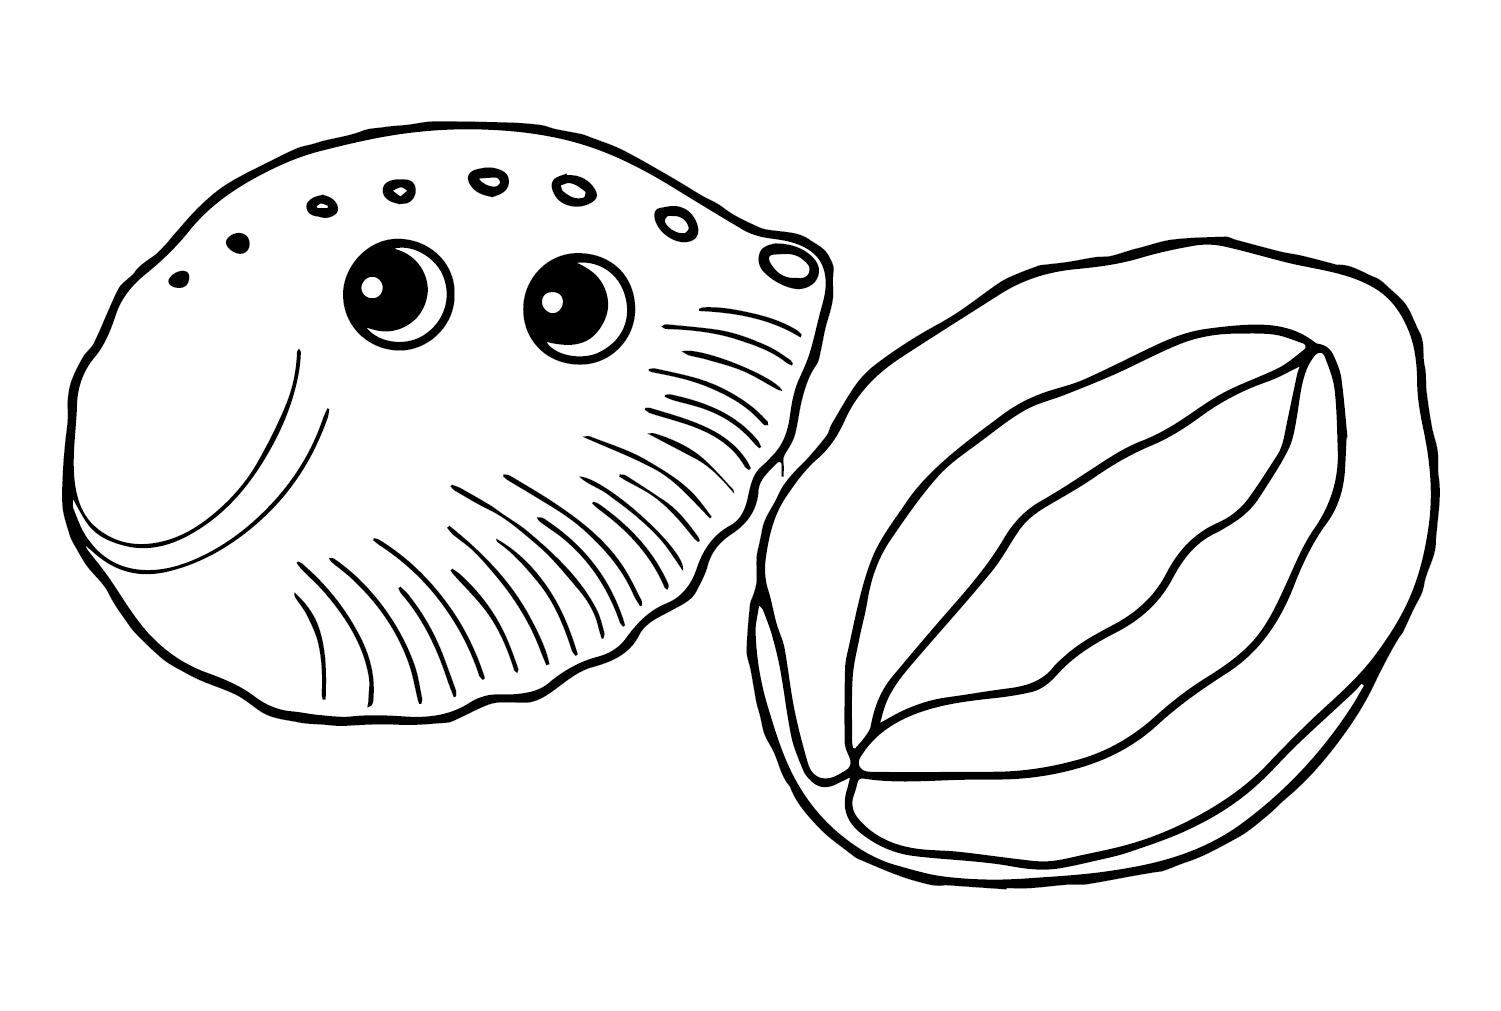 Abalone Coloring Page PDF from Abalone